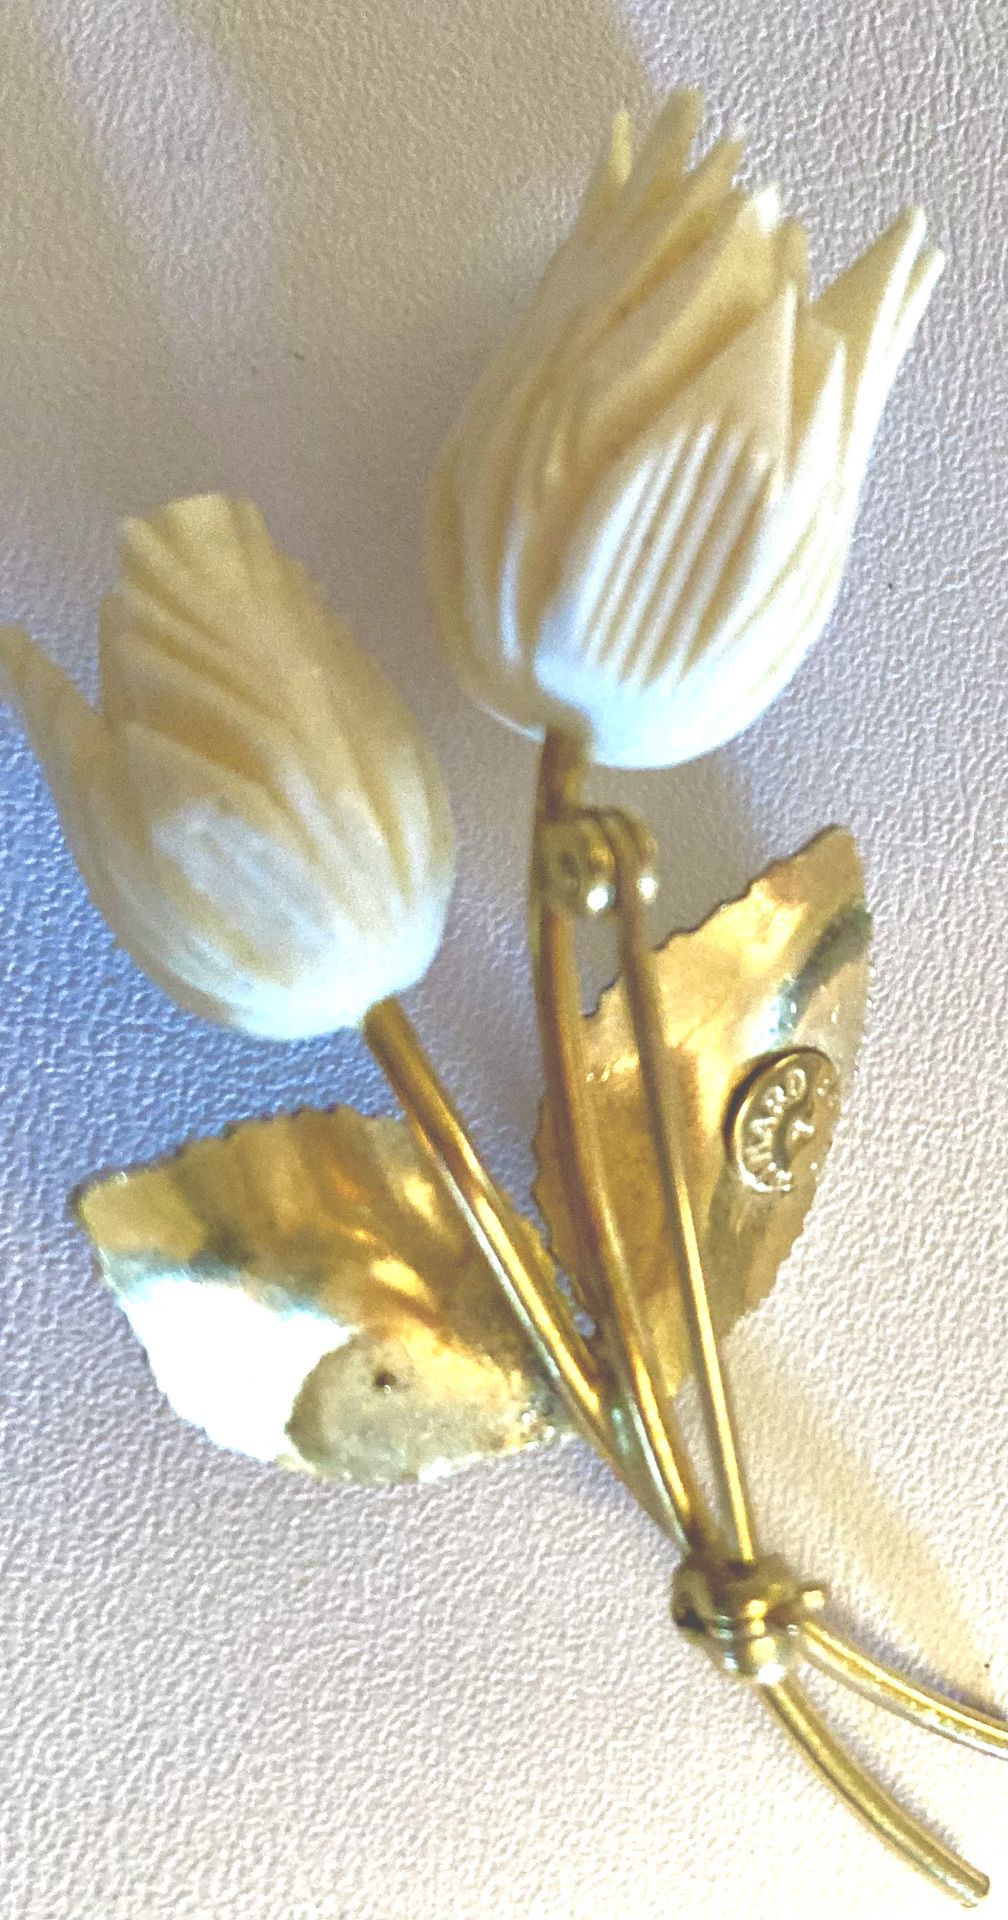 3 Brooches/Pins-Carved Roses-Sterling/Napier Sterling/Winard GF